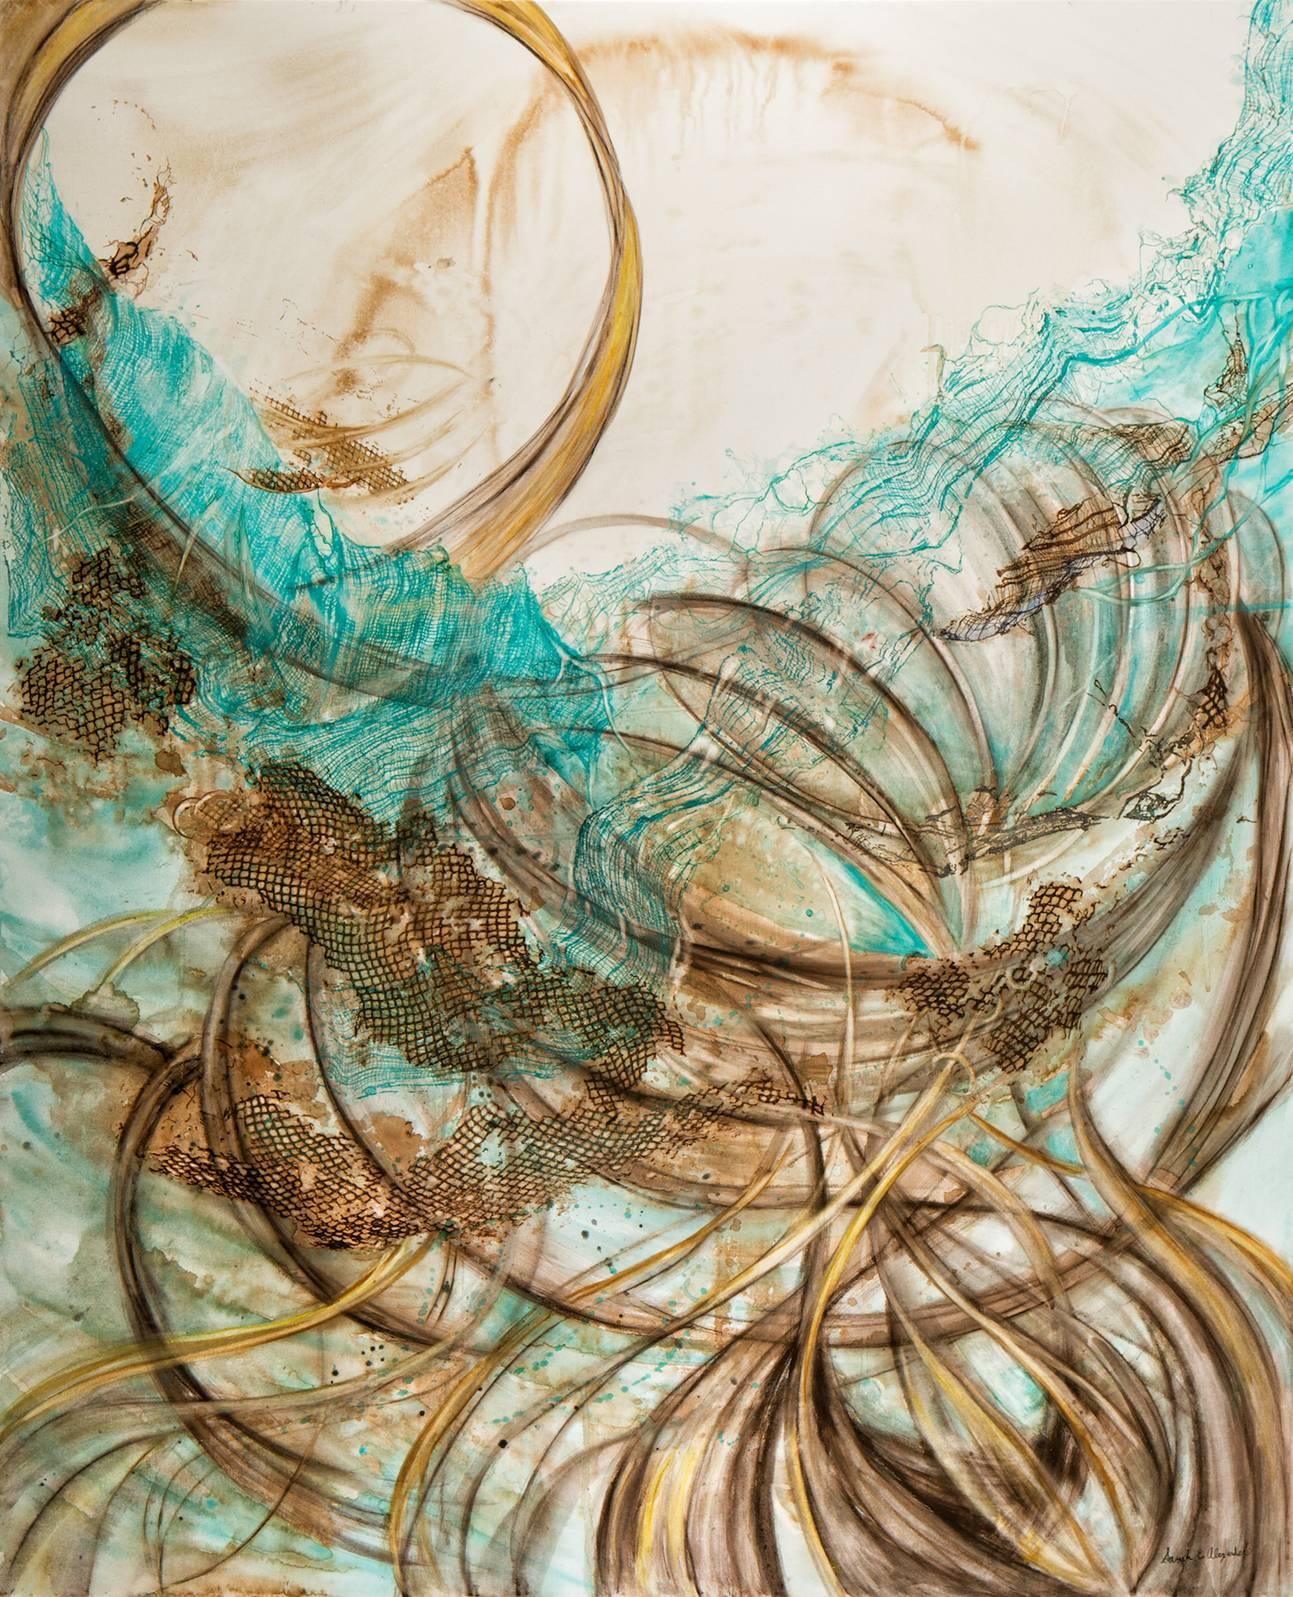 Sarah Alexander Abstract Painting - "In Flux", abstract, turquoise, brown, mixed media, watercolor, painting